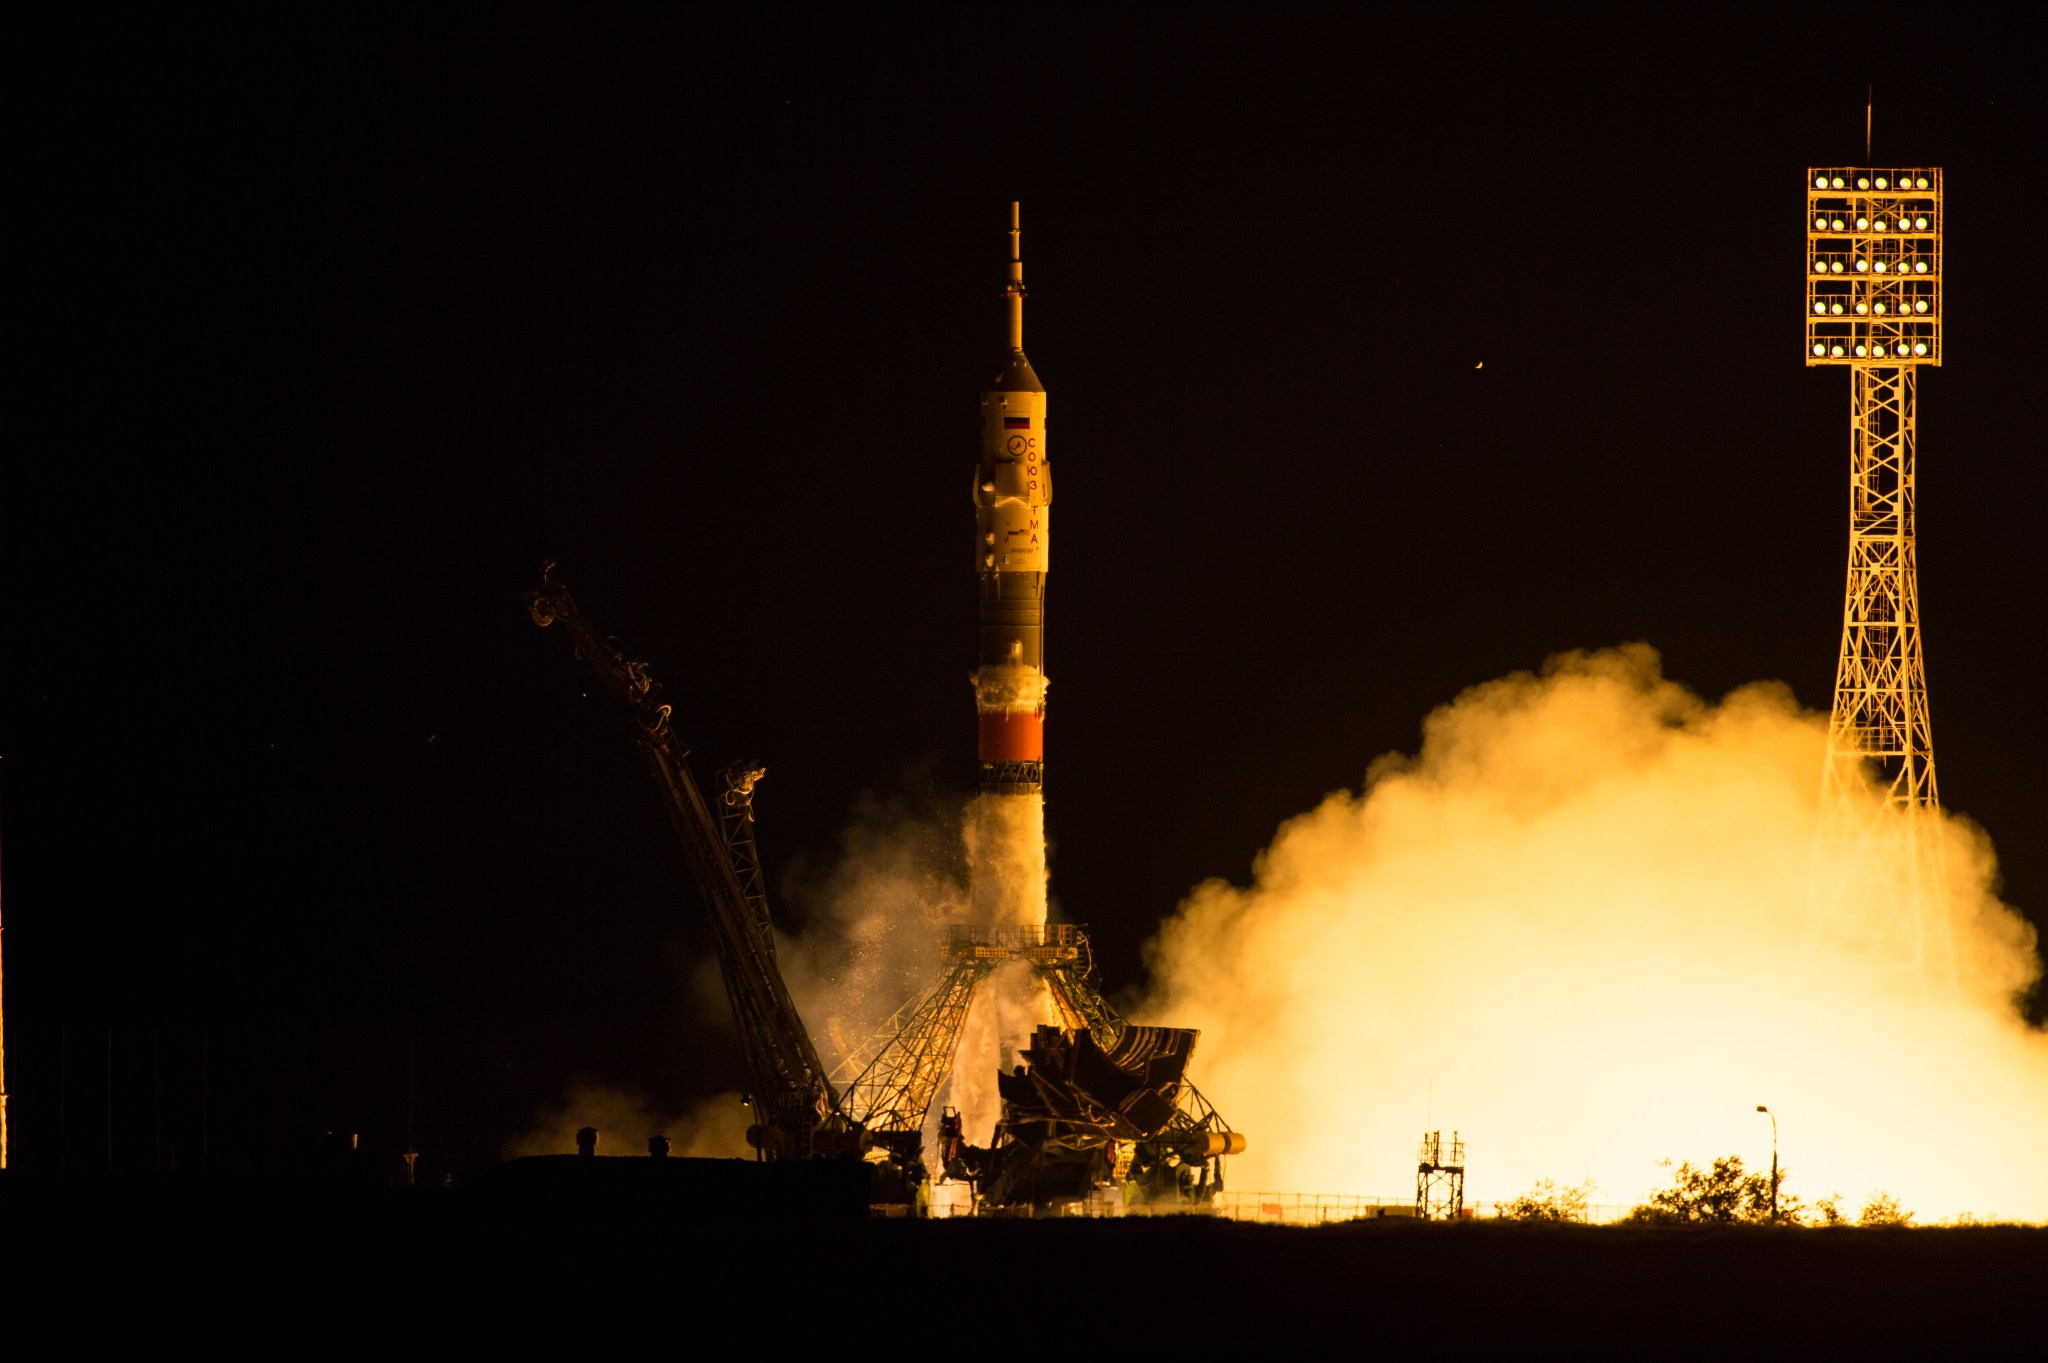 Soyuz TMA-17M rocket launched from the Baikonur Cosmodrome in Kazakhstan